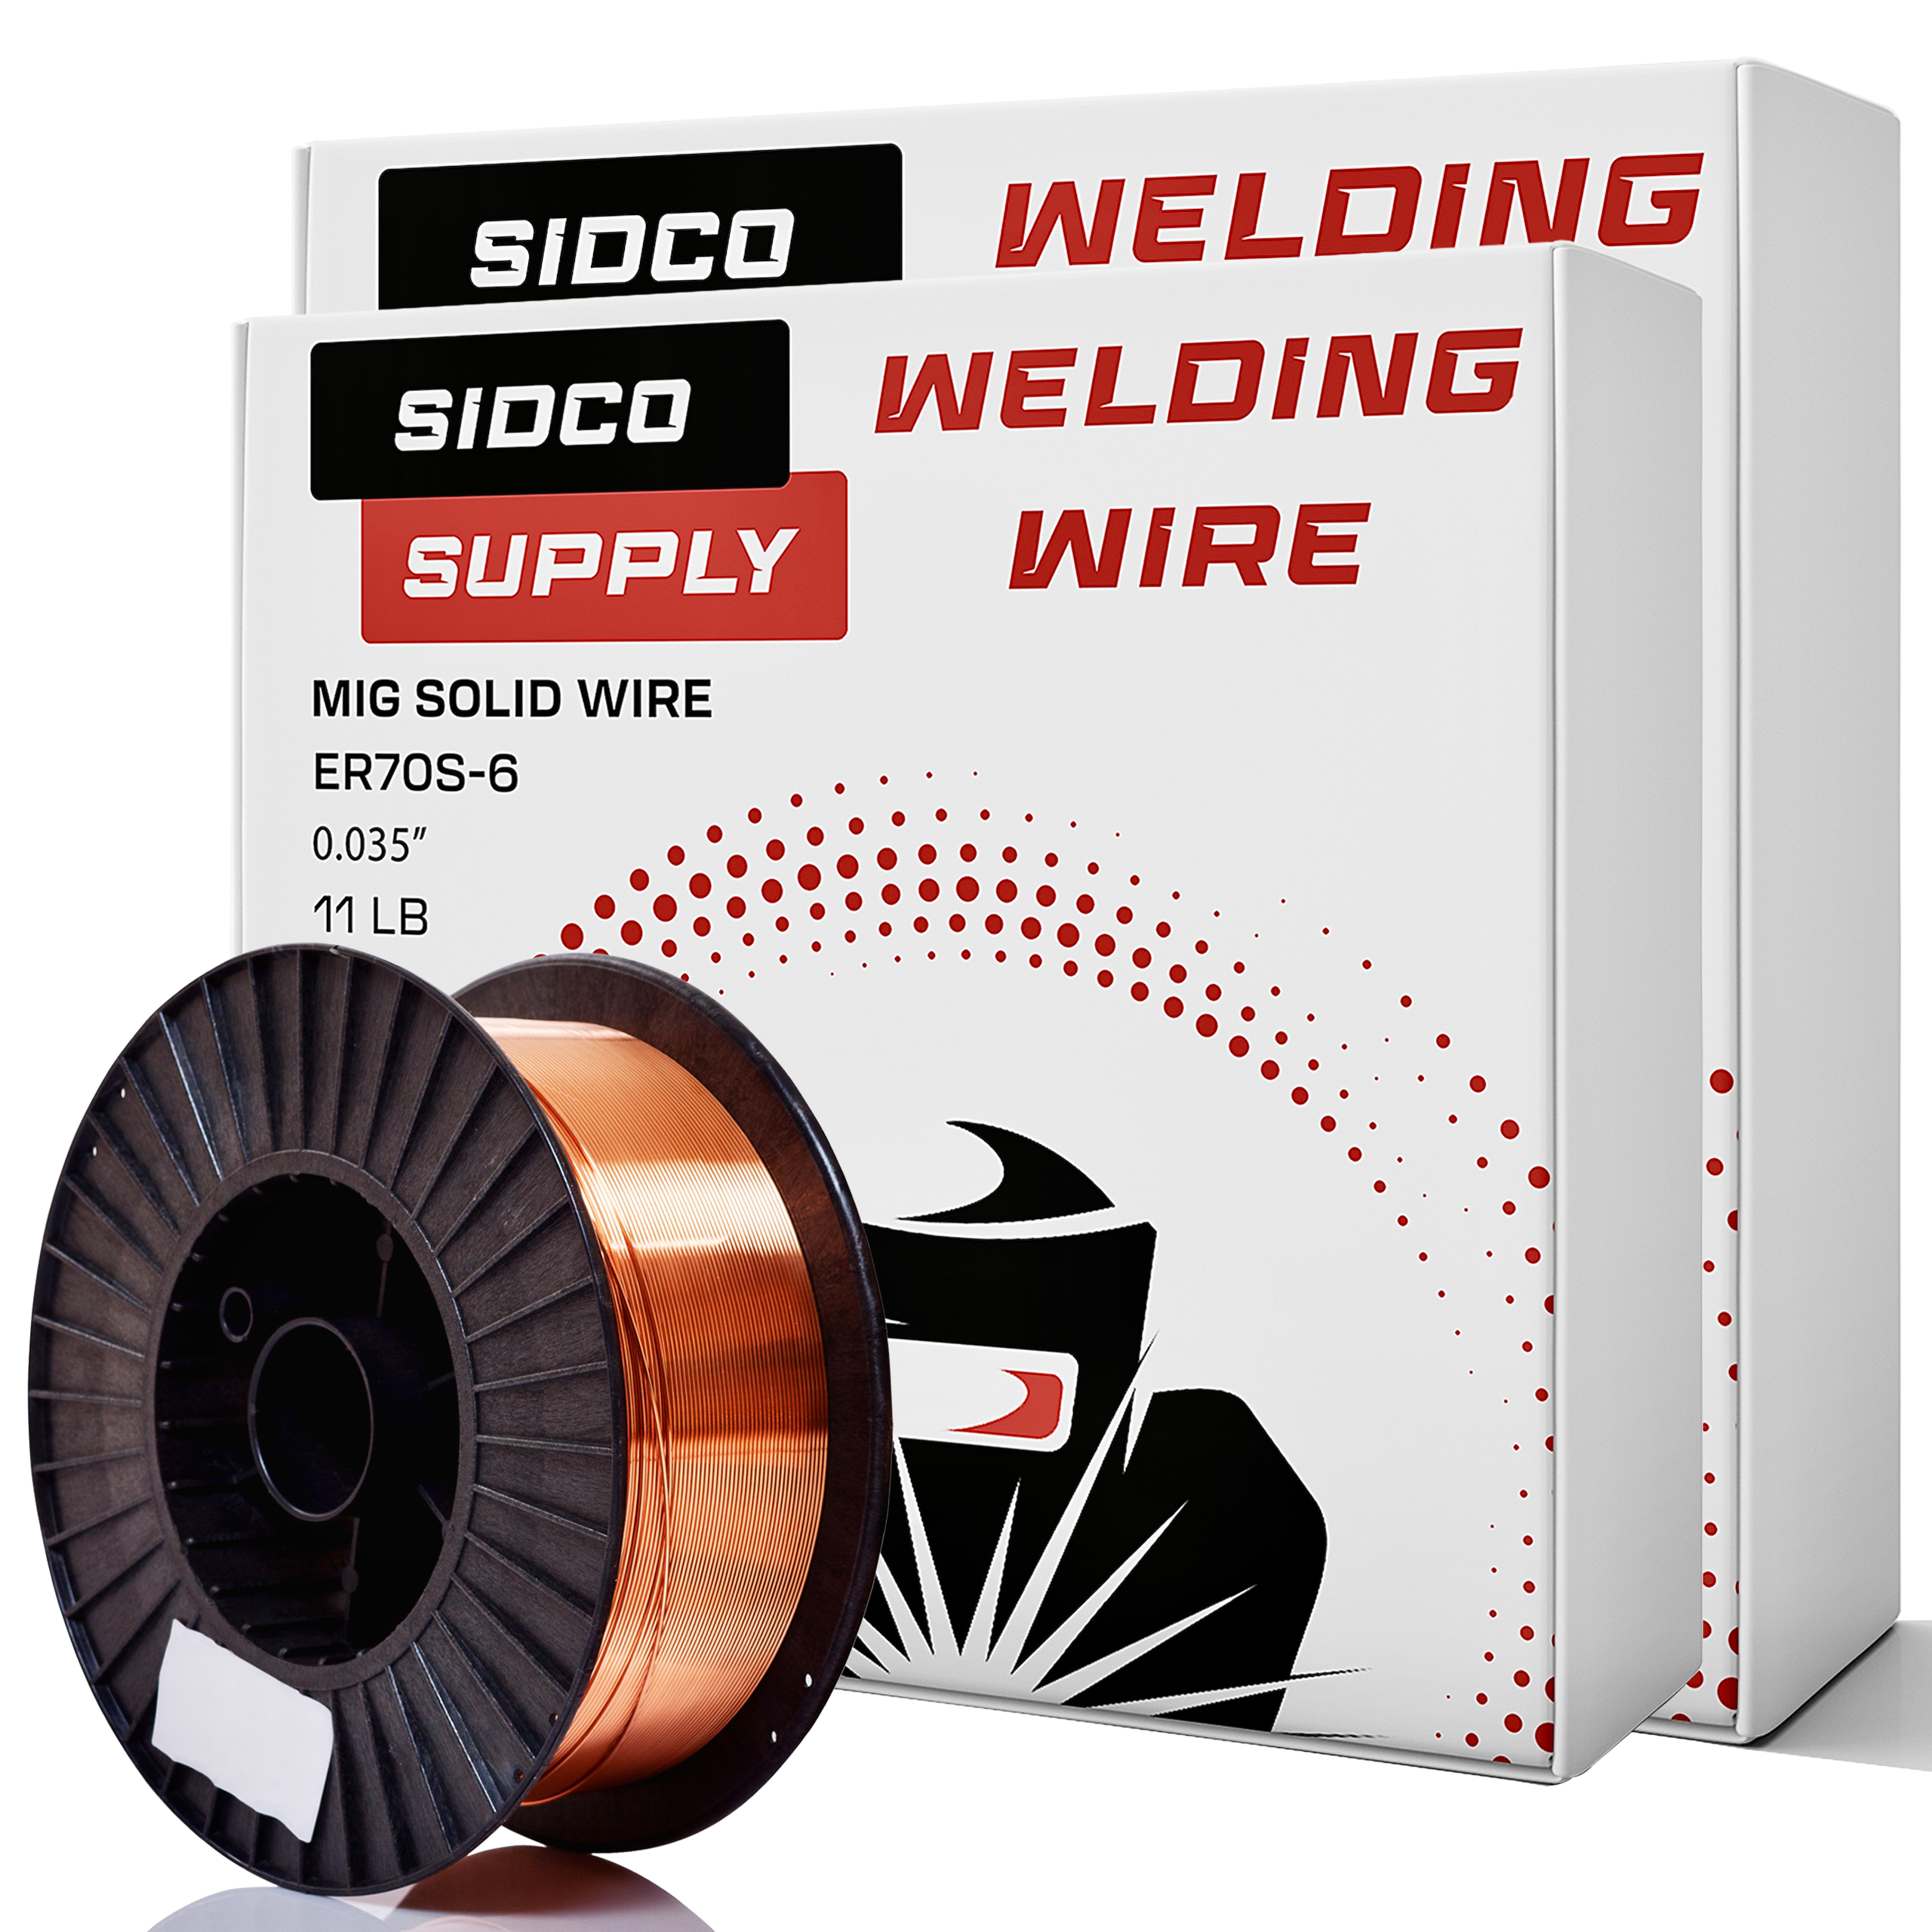 Solid MIG Welding Wire - ER70S-6-0.035 Inch, 11 LB Spool – 2 Pack